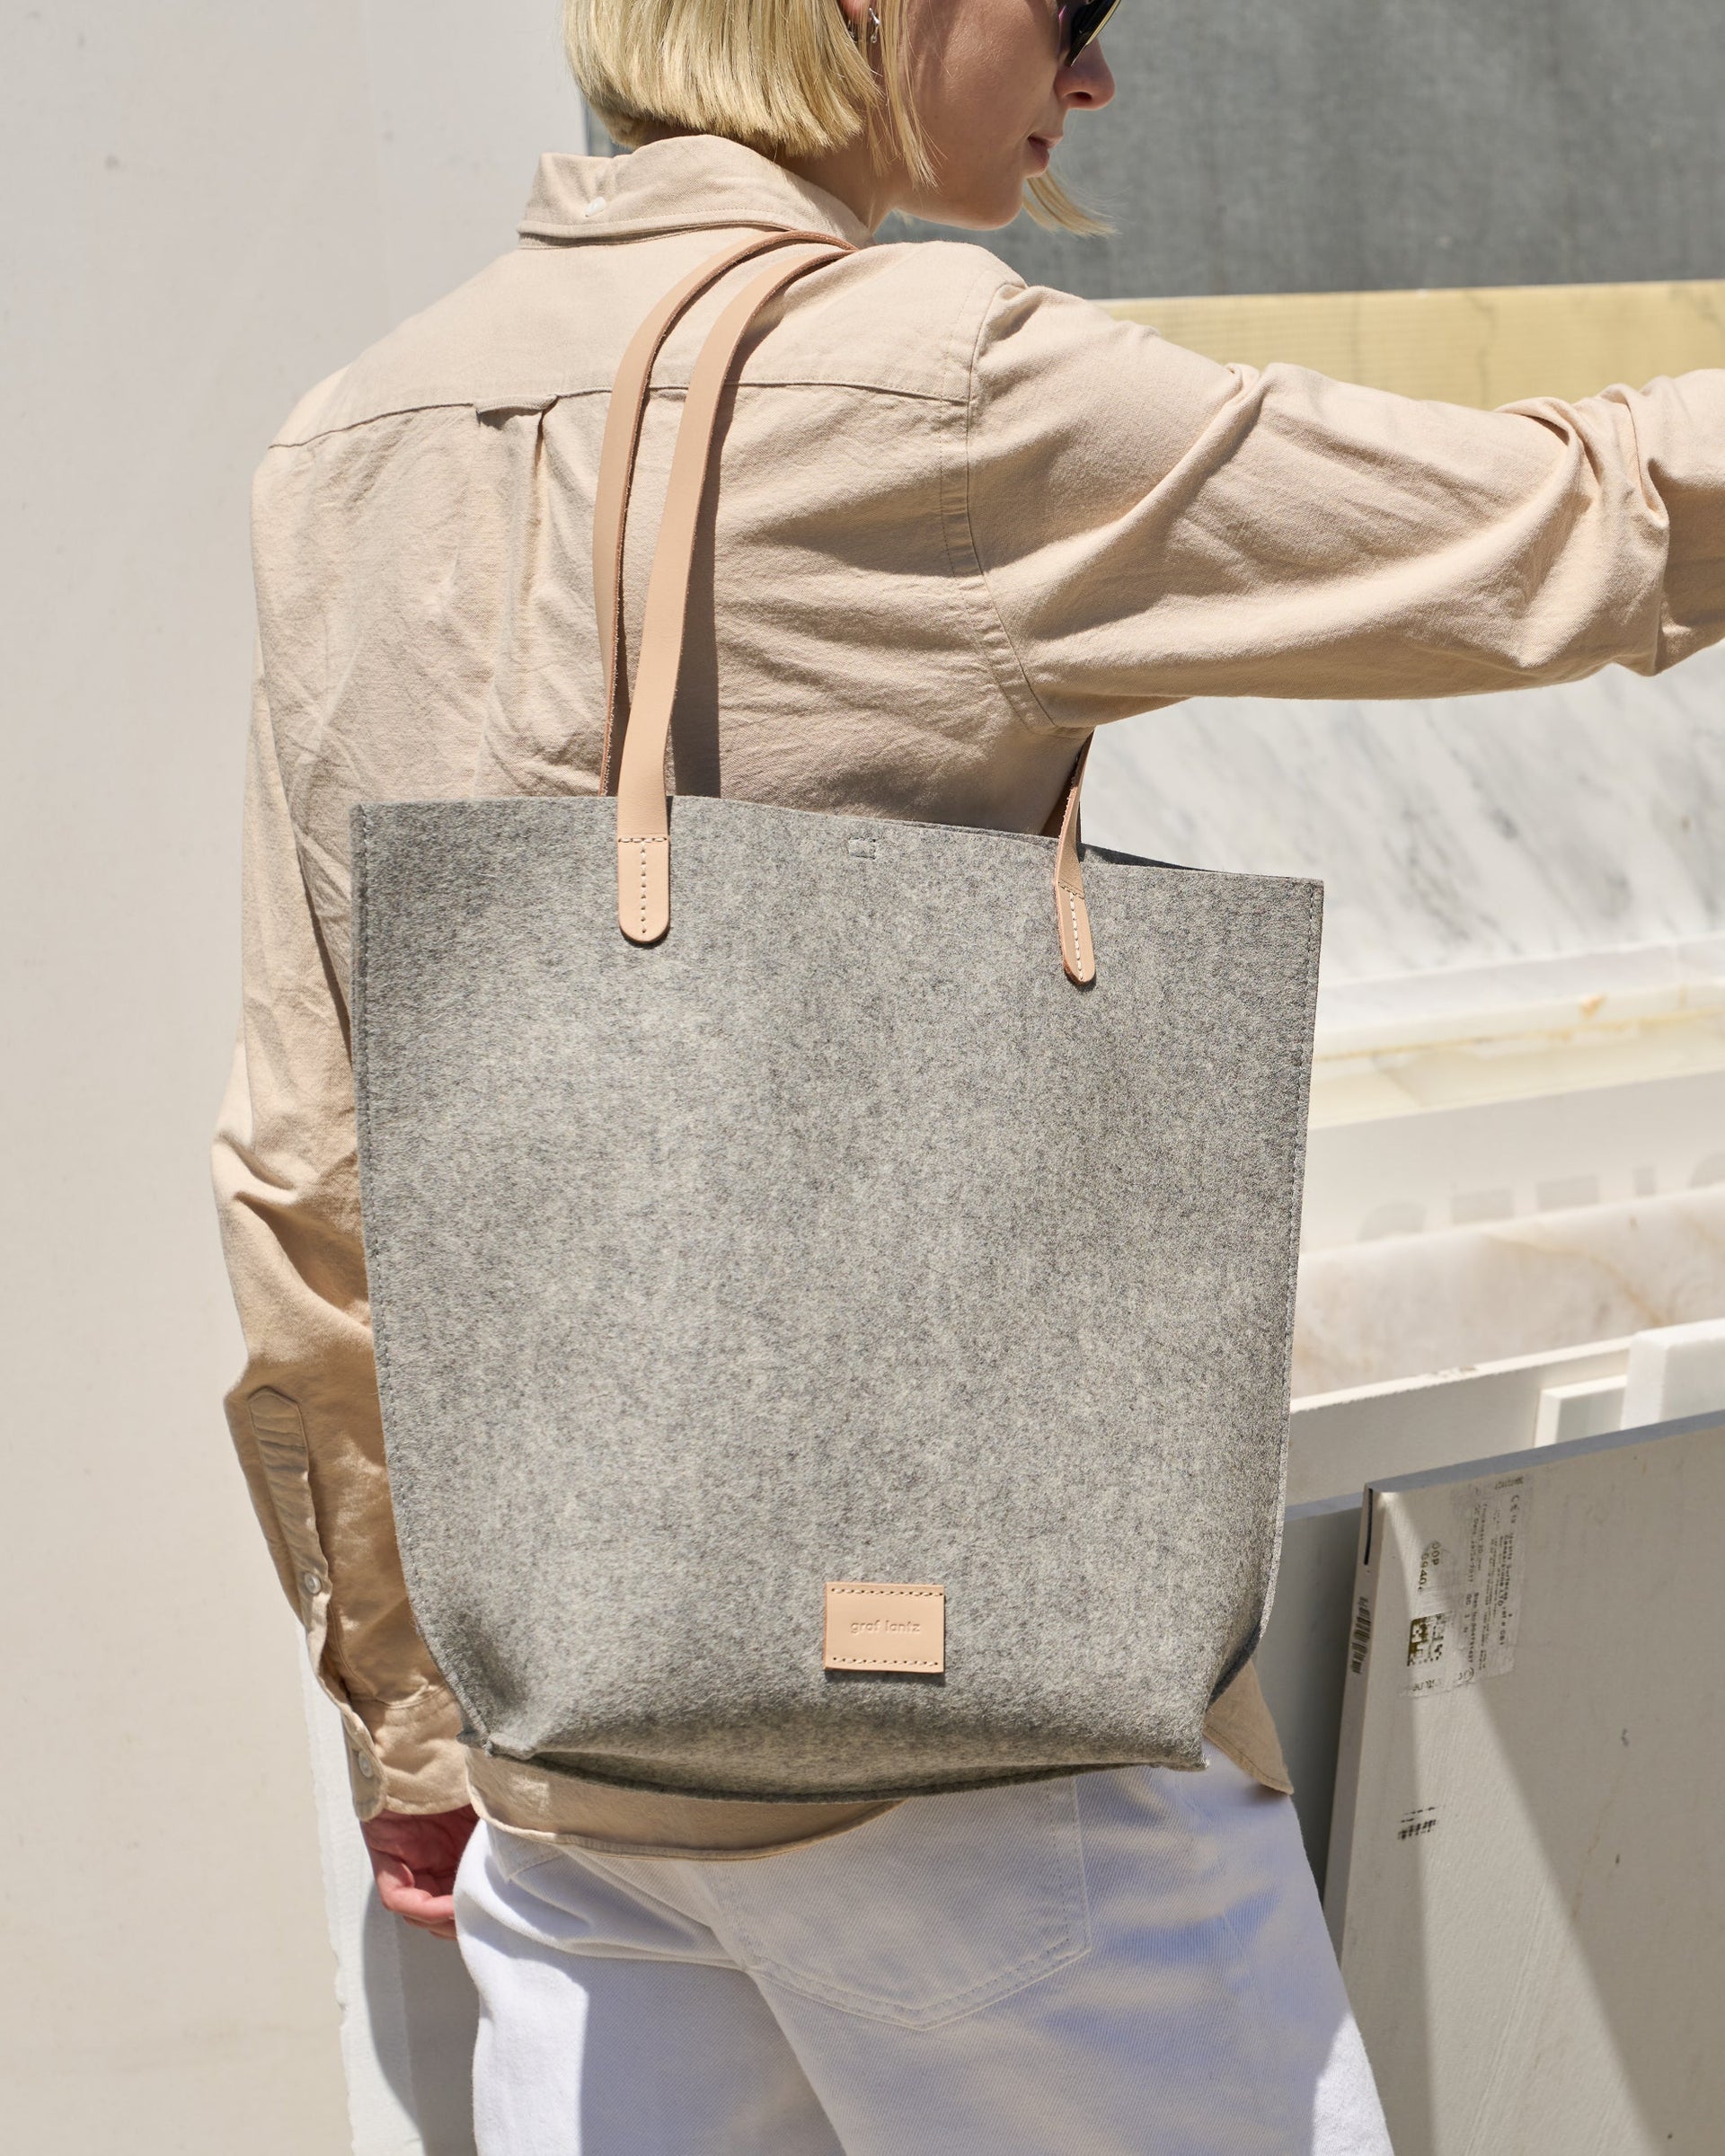 A granite-colored Hana Merino Wool Felt Tote carried by a woman over her shoulder, showcasing its grey and beige colors